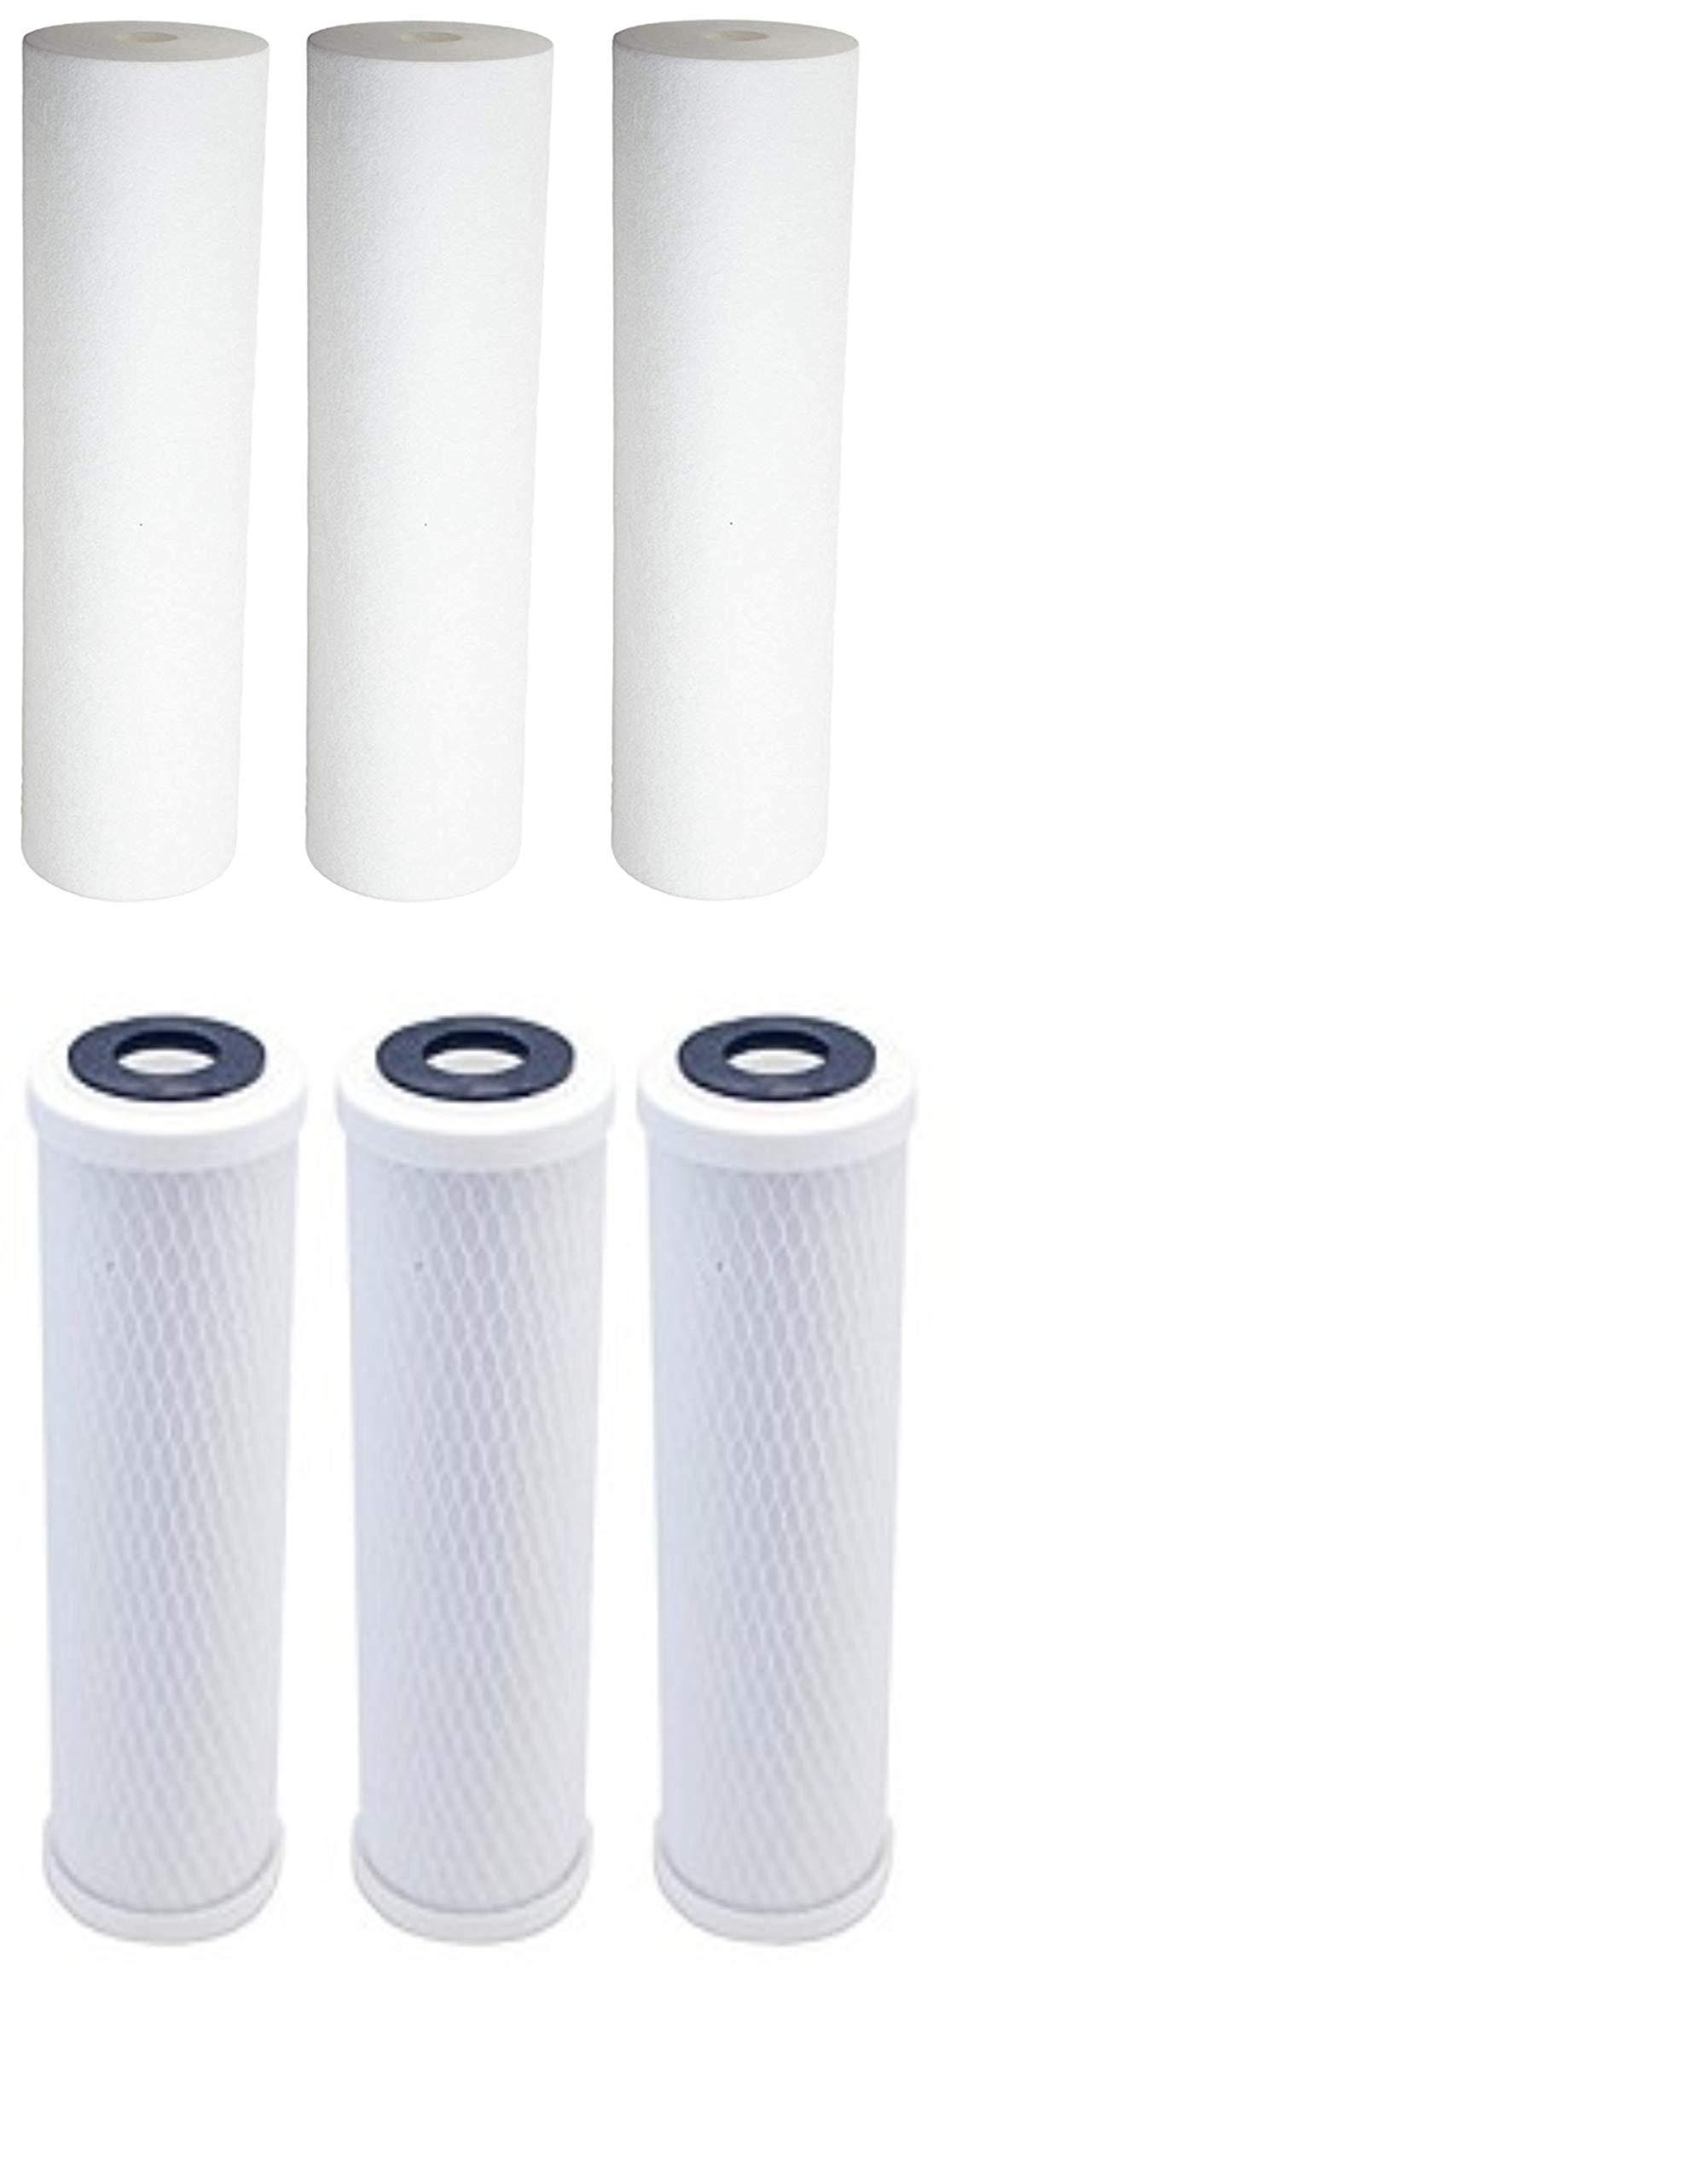 CFS COMPLETE FILTRATION SERVICES EST.2006 3-pack replacement filter kit for watts wp-2 lcv ro system - includes carbon block filter & pp sediment filter